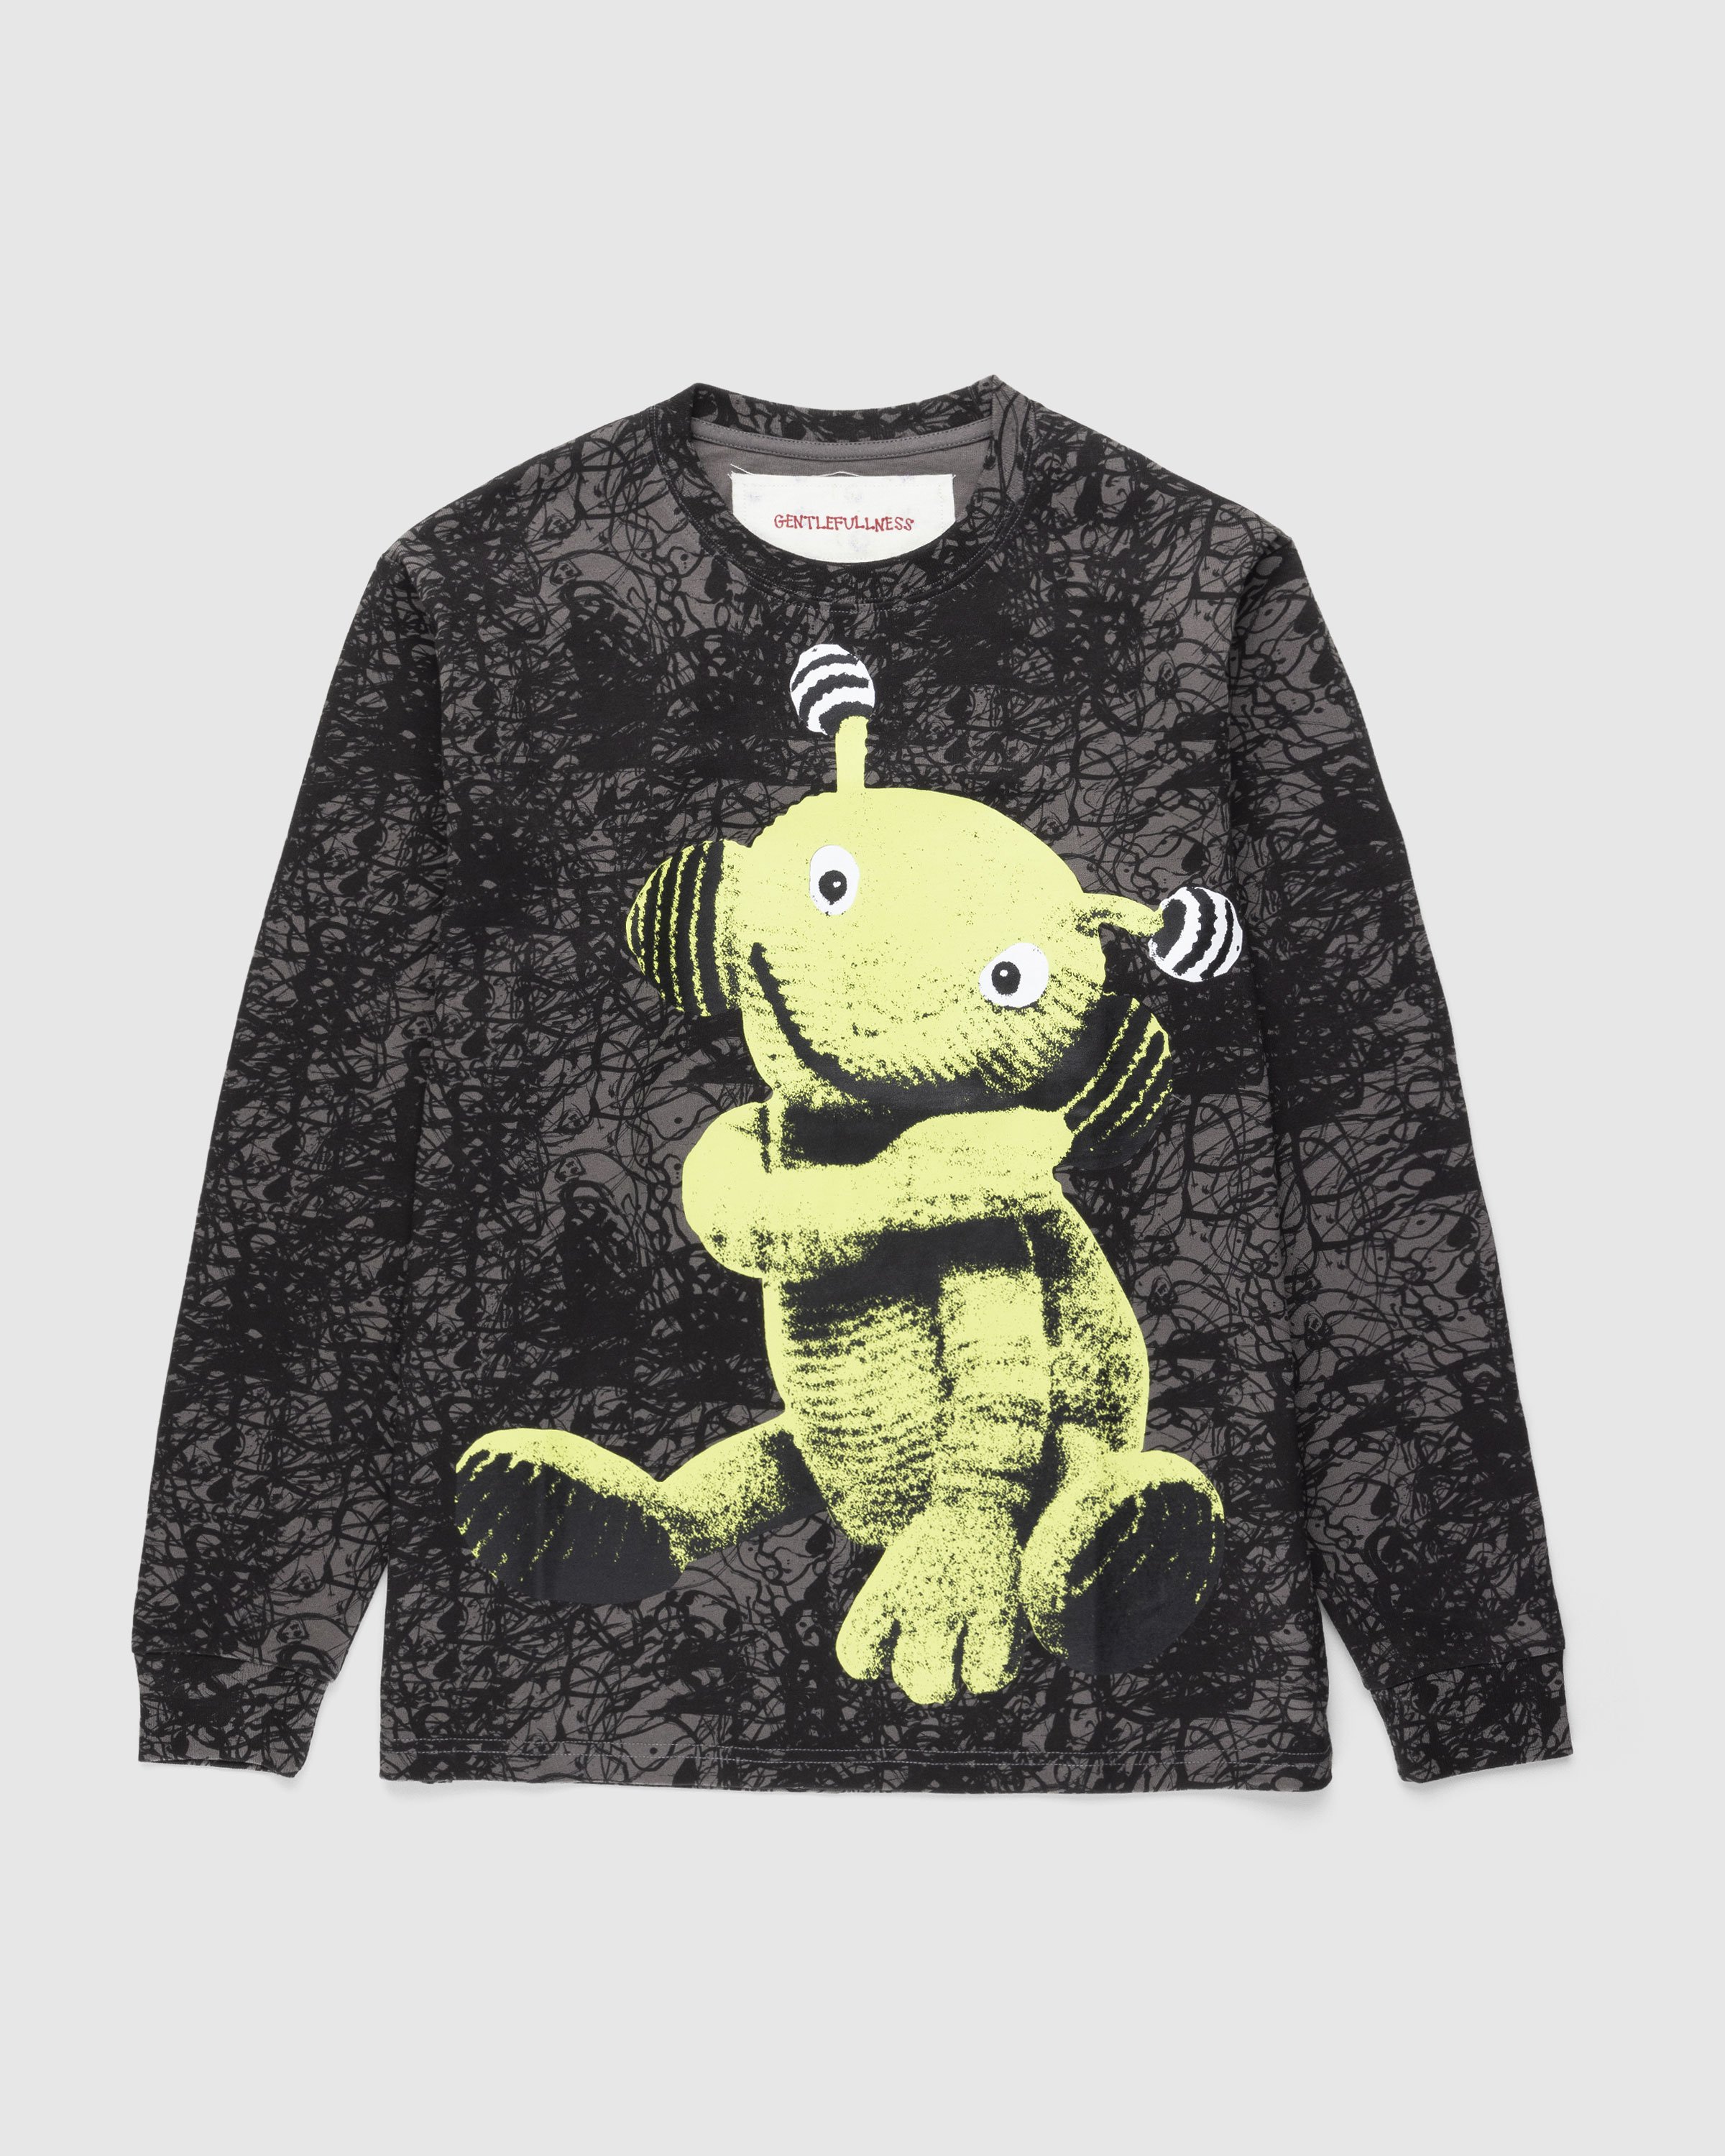 Gentle Fullness - Recycled Cotton Alien Puppet Longsleeve Tee Washed Black - Clothing - Multi - Image 1